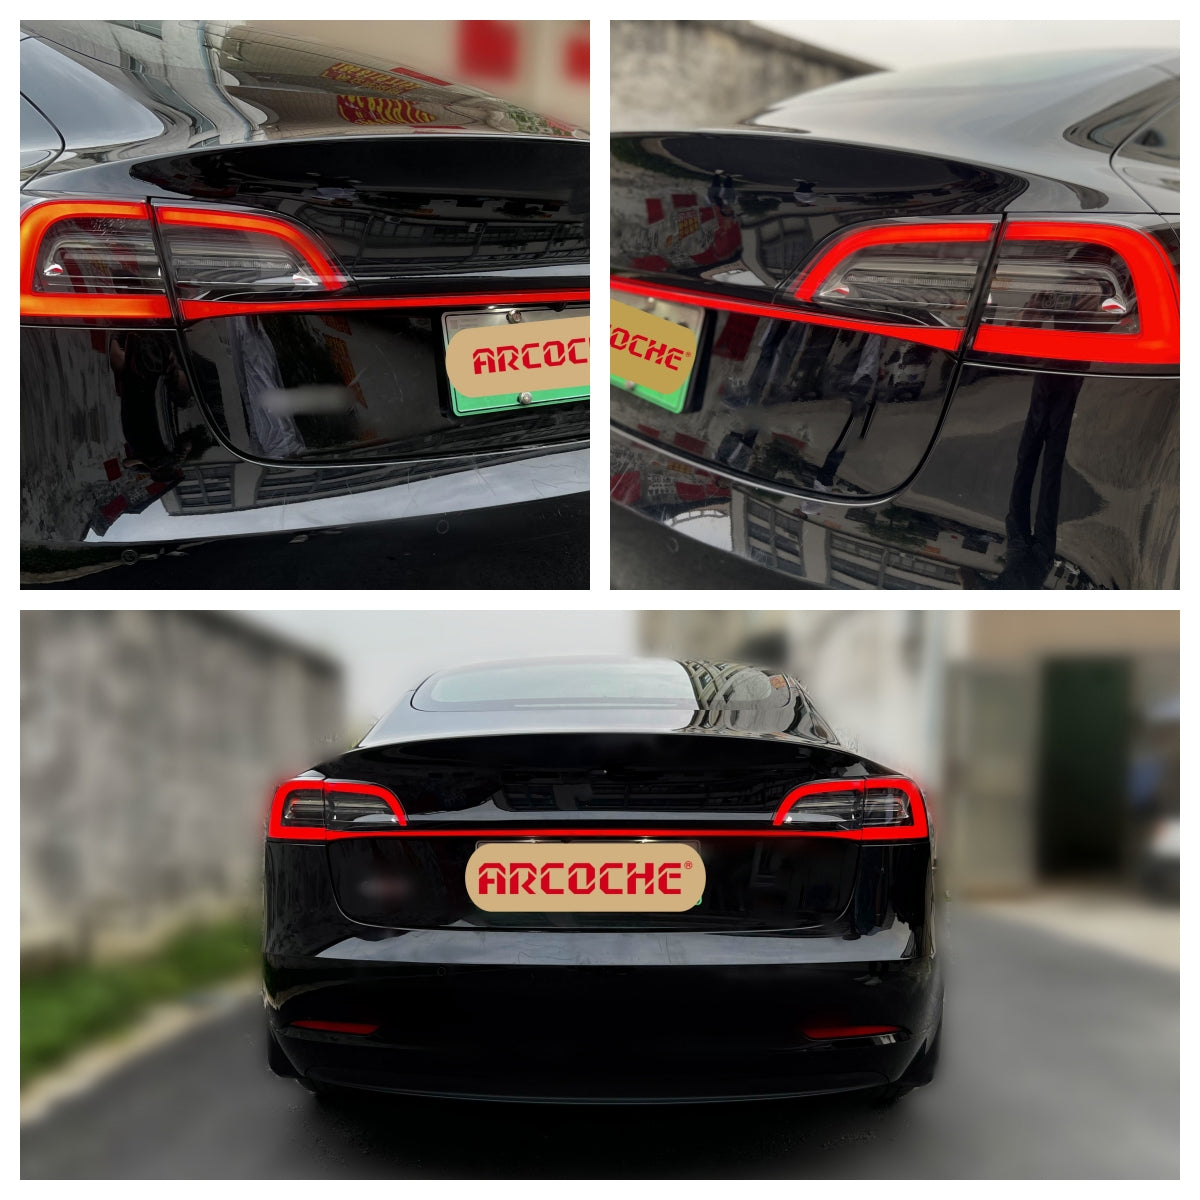 Full-Width Through Taillight for Model 3/Y